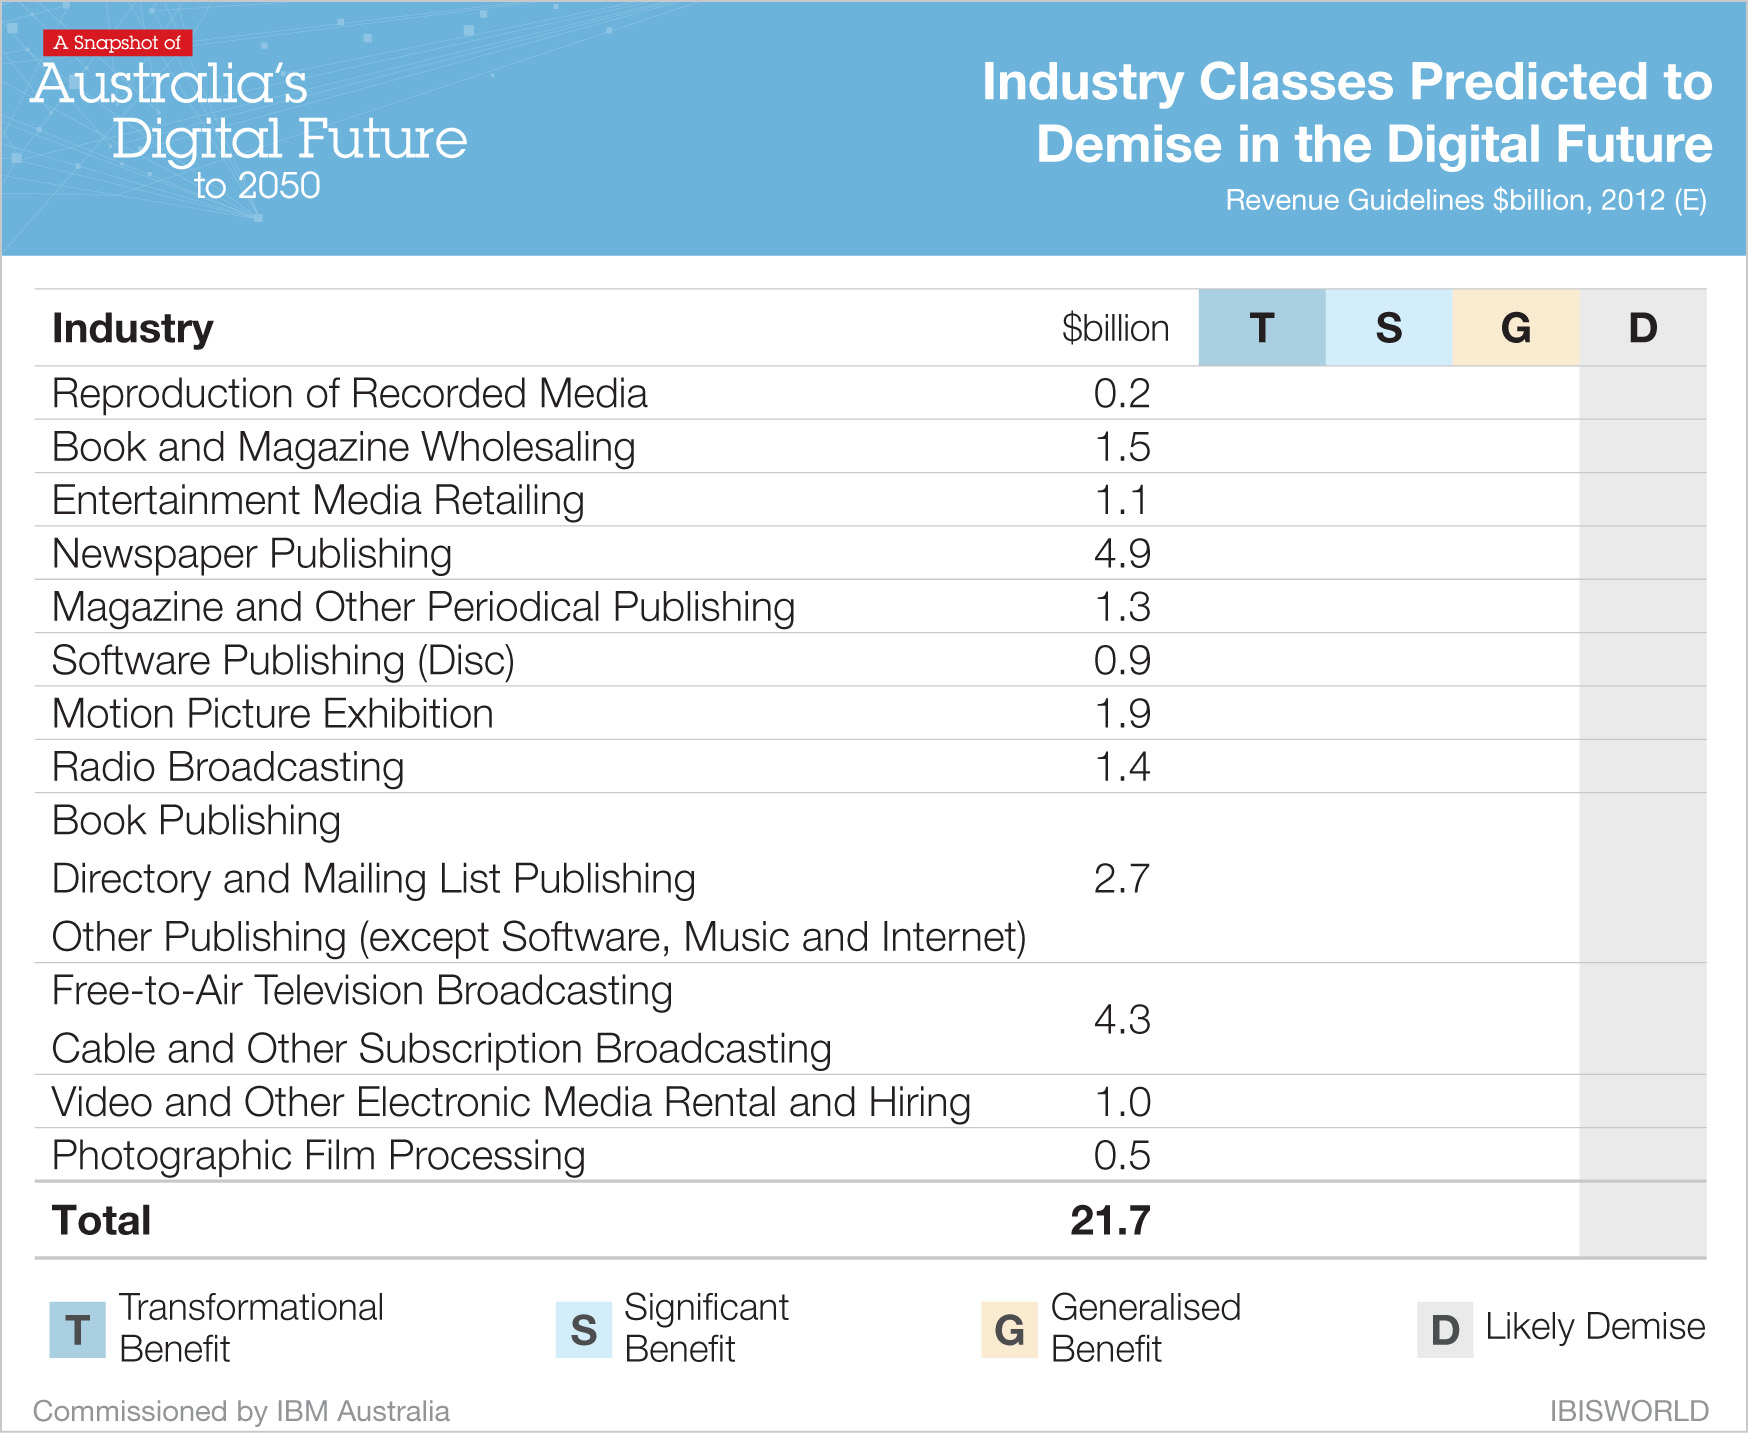 Industry Classes Predicted to Demise in the Digital Future